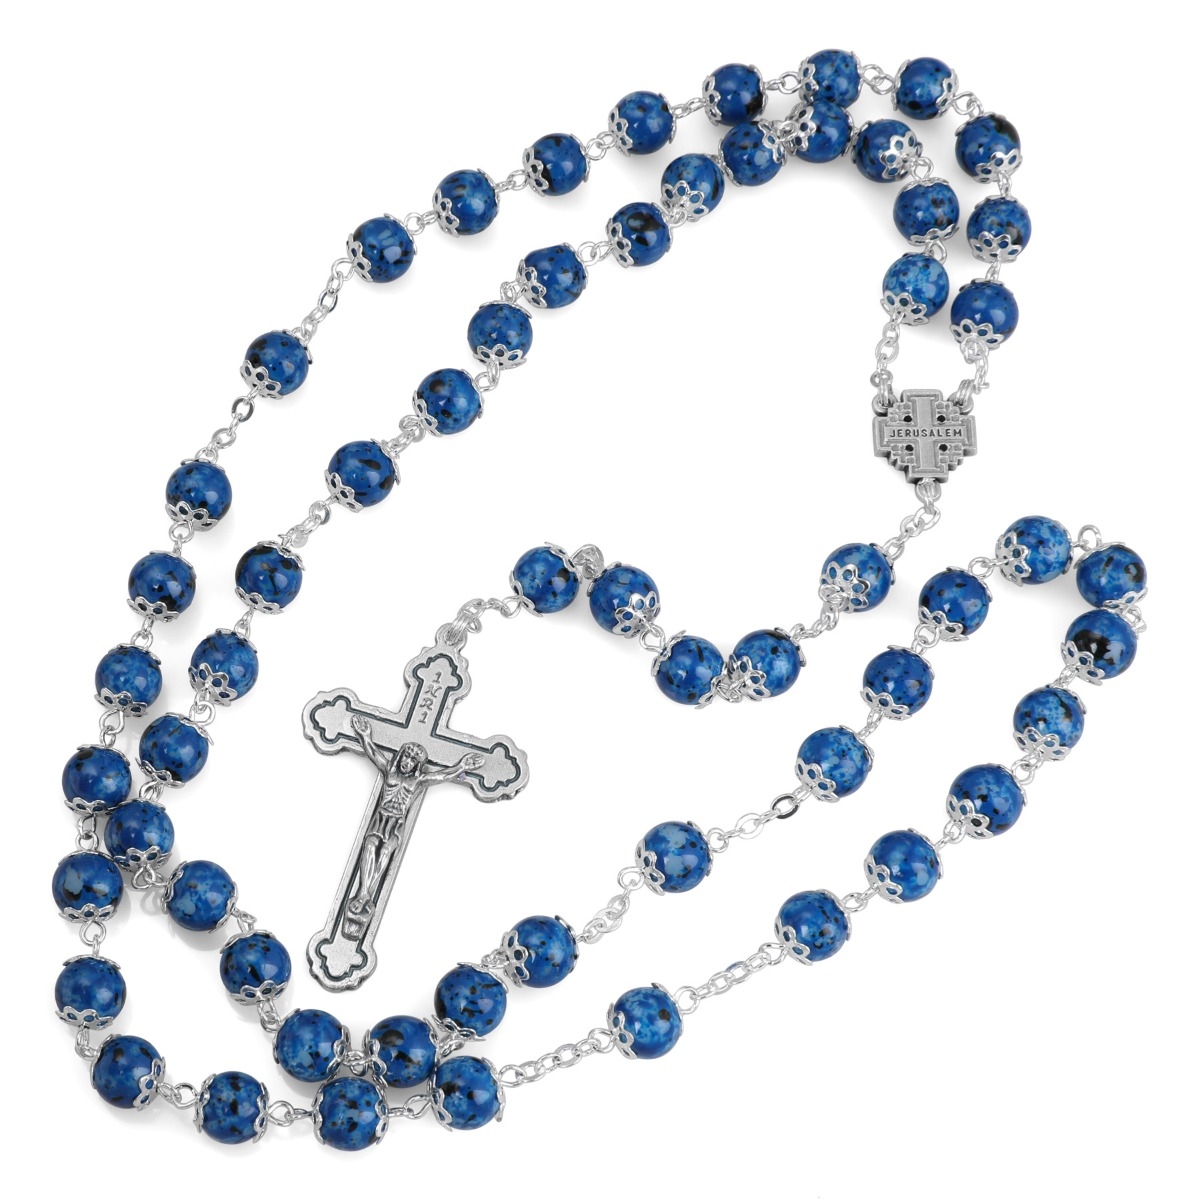 Holyland Rosary Blessing From Jerusalem Blue Beaded Rosary With Jerusalem Cross and Crucifix - 1